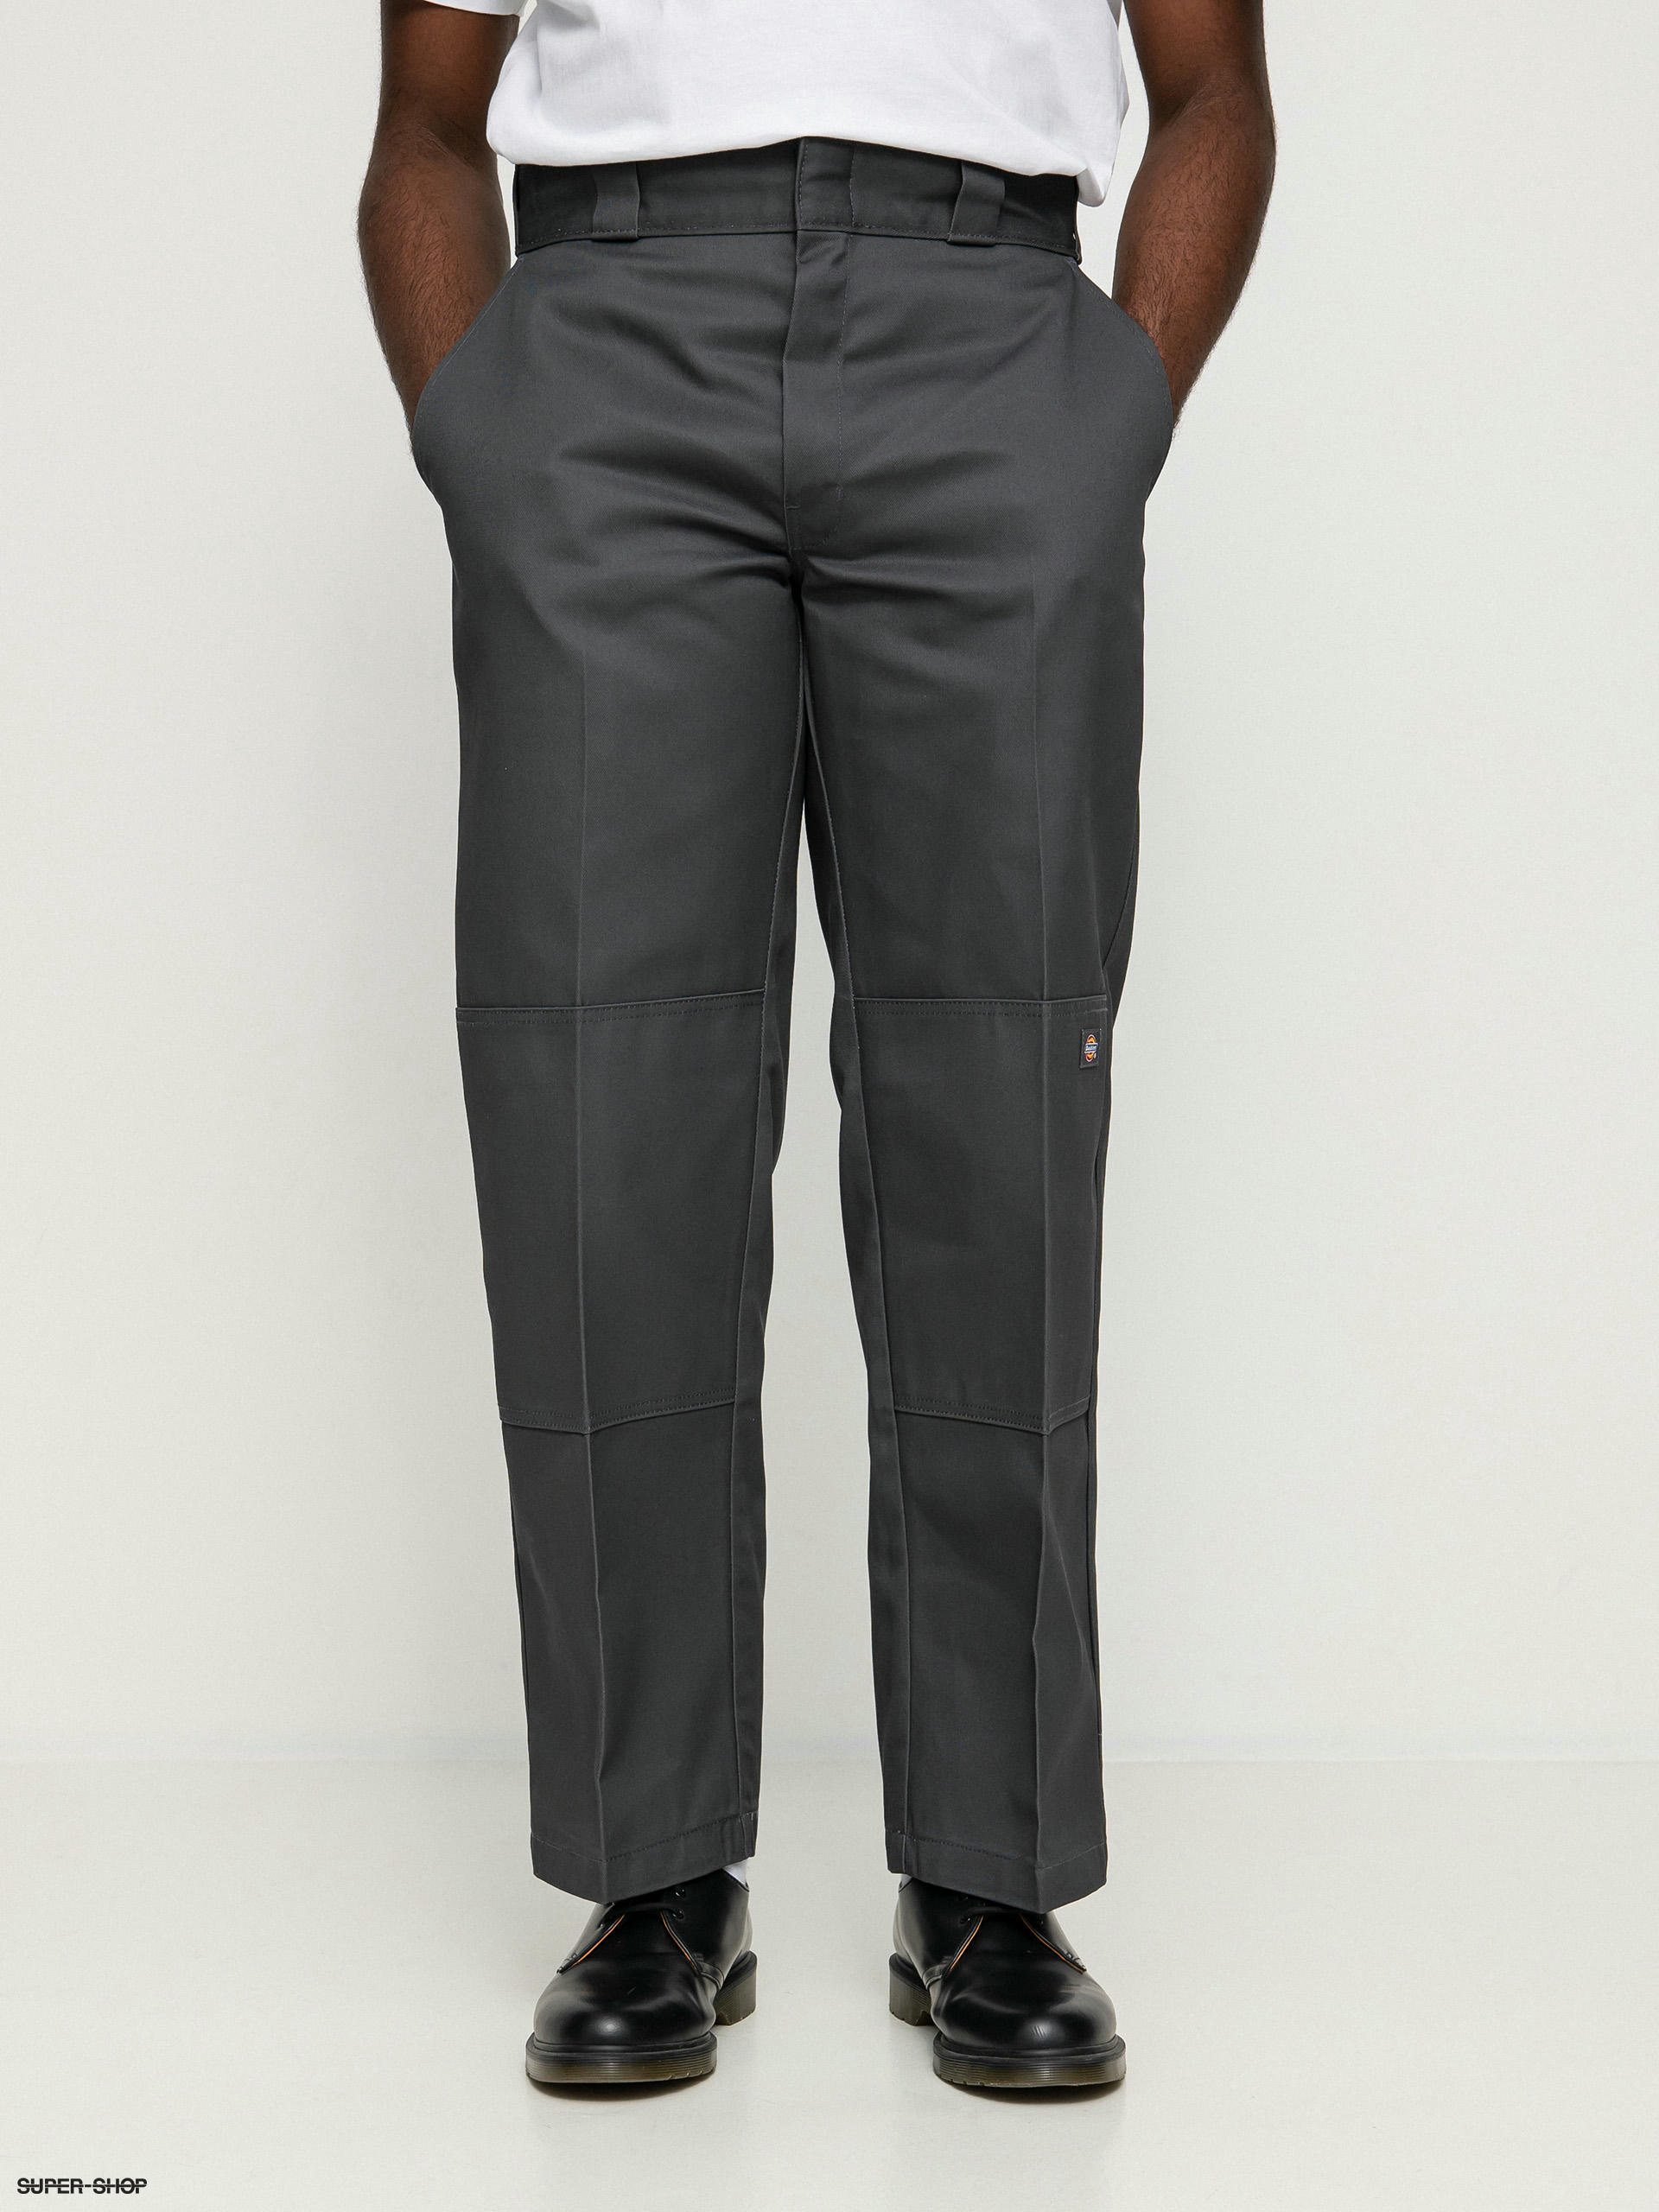 Dickies Loose Fit Double Knee Pant, Urban Outfitters